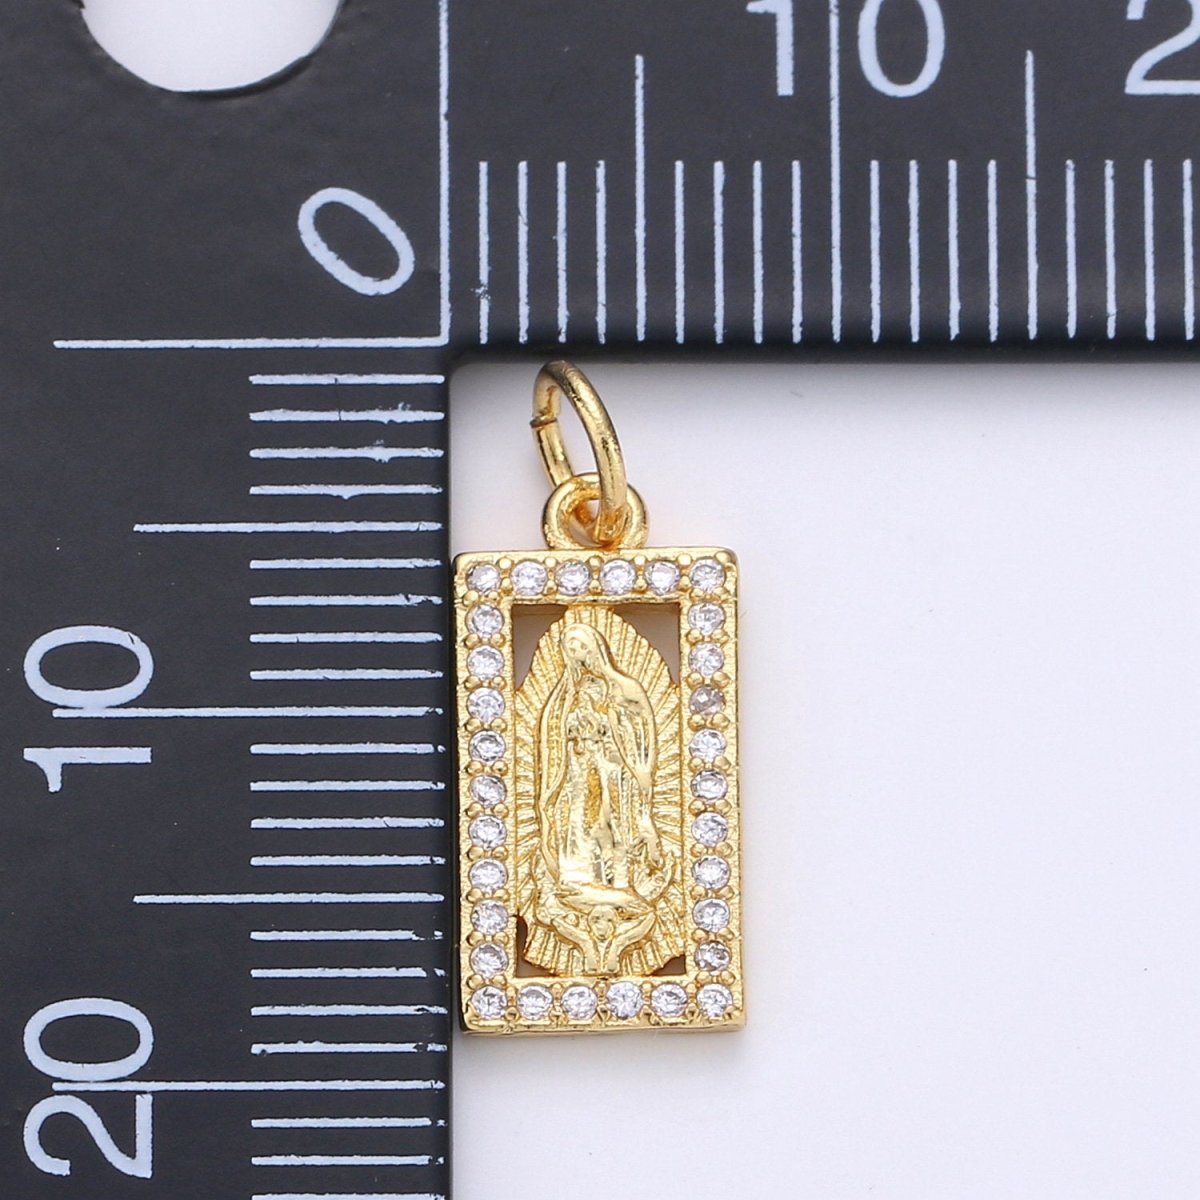 Tiny Virgin Mary Charm CZ Cubic Zirconia Mini Religious Charm Gold Charm 14k Gold Filled Micro Pave Charm for Bracelet Necklace Earring, D-249, D-454 - DLUXCA